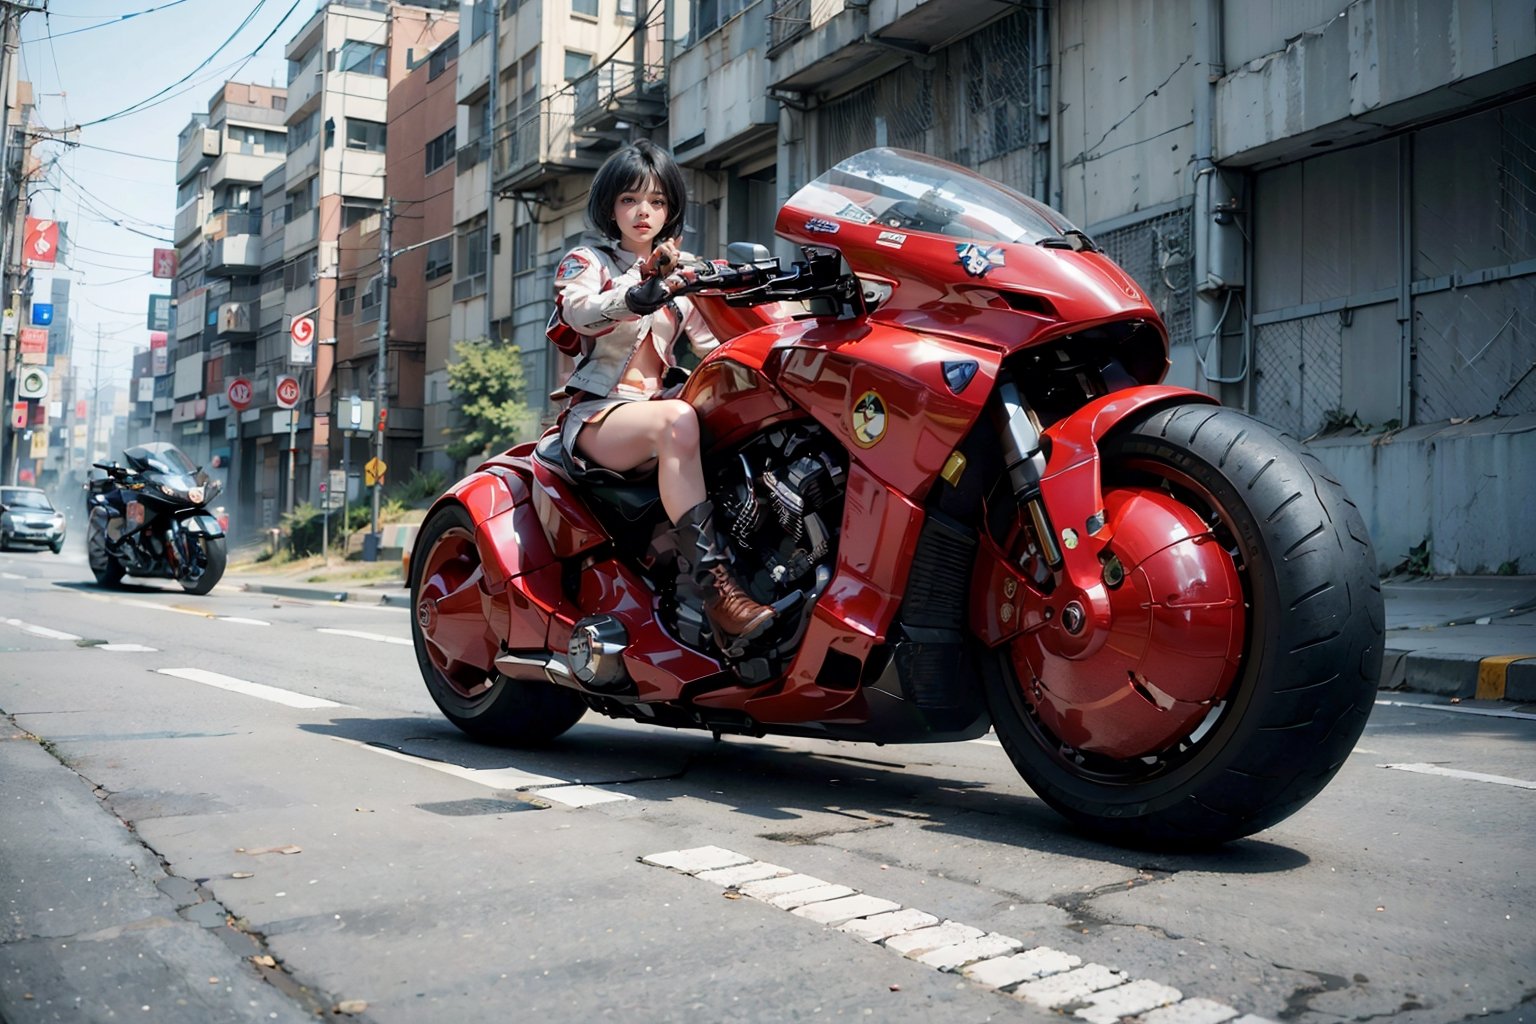 (Realistic, Photorealistic: 1.3), Original, Masterpiece, 16K, High Contrast, (Highest Resolution Illustration), Photorealistic: 1.3, Side Light, ((Exquisite Details and Textures)), Cinematic Shot, Ultra Realistic Photo, Siena Natural Proportions, Full Body View, ((White Short Hair, Bangs)), ((1 Girl on a White Motorcycle, Wearing a Red and White Armored Tight Leather Jacket)), Detailed Face, Abdomen, ((Perfect Details Kaneda Motorcycle)), (AKIRA), Cyberpunk City Night, ((Futuristic)), sprbk